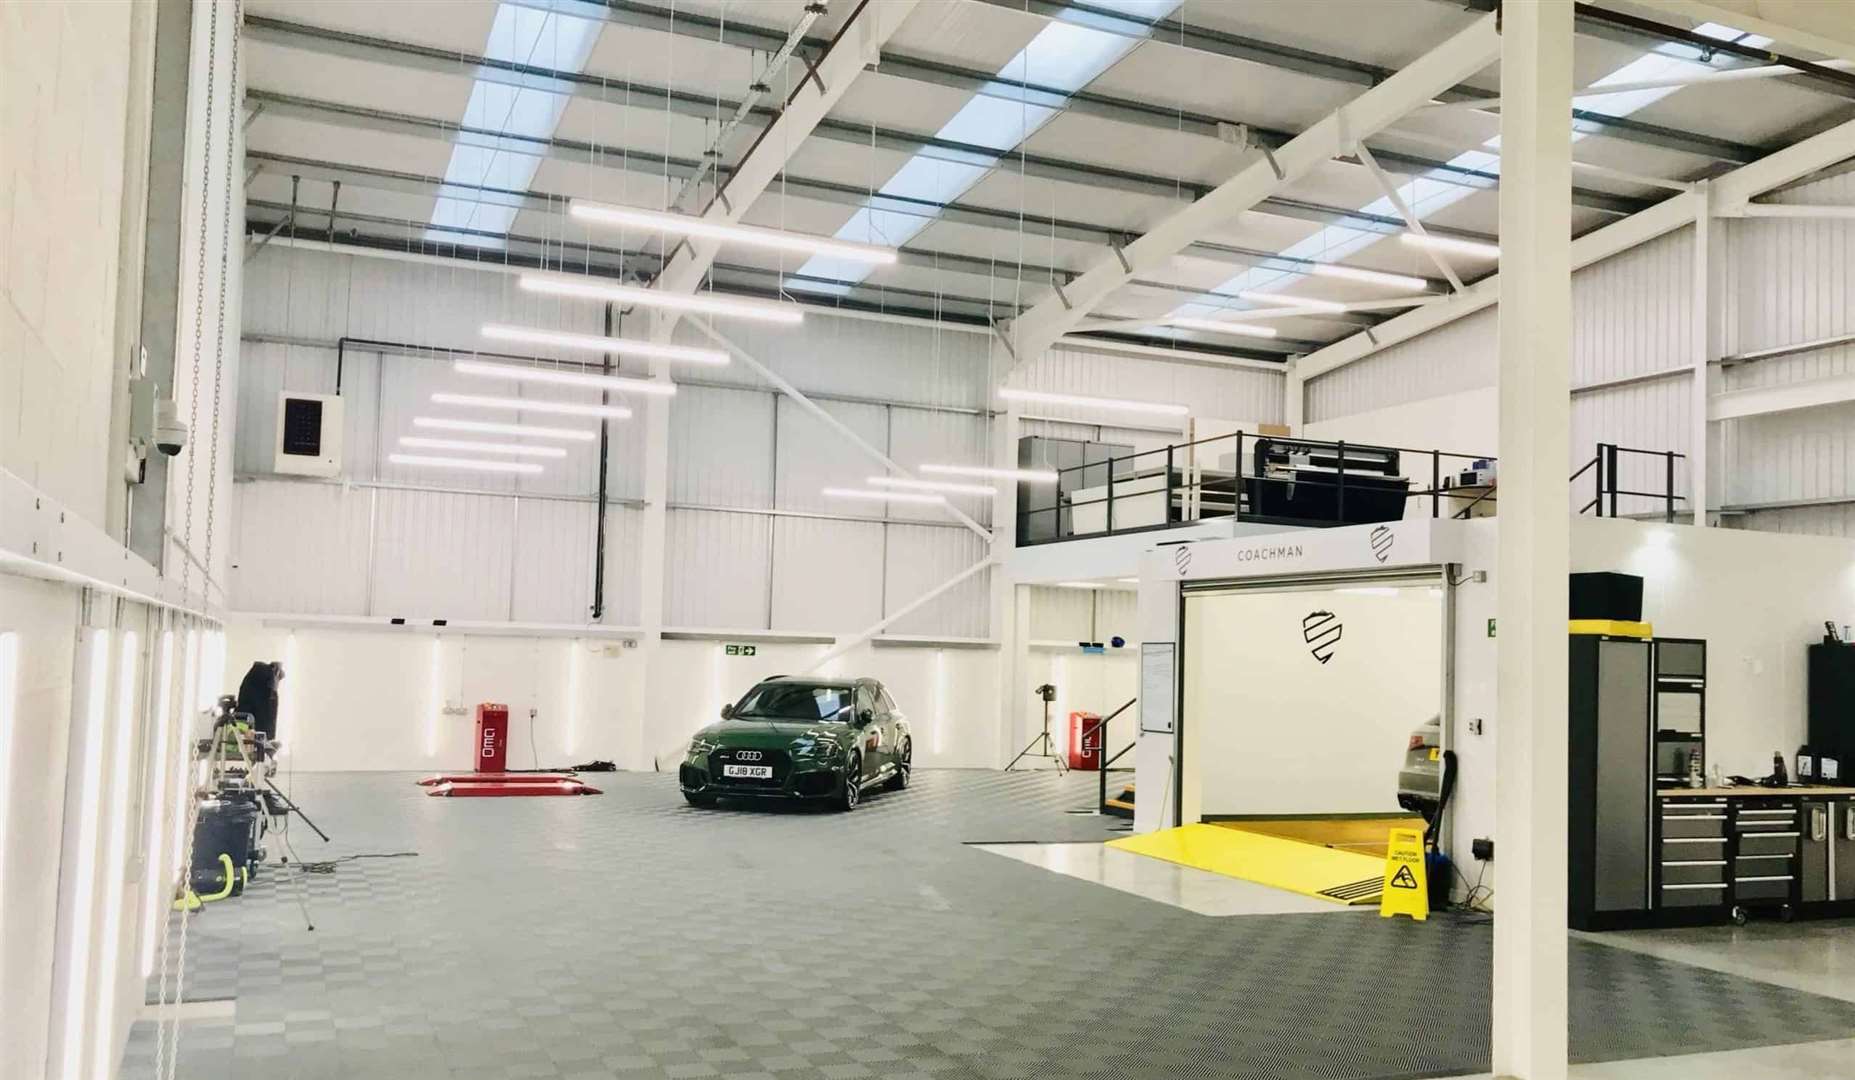 Coachman delivers expert vehicle detailing and paint protection services at a new, state-of-the-art, Maidstone studio.